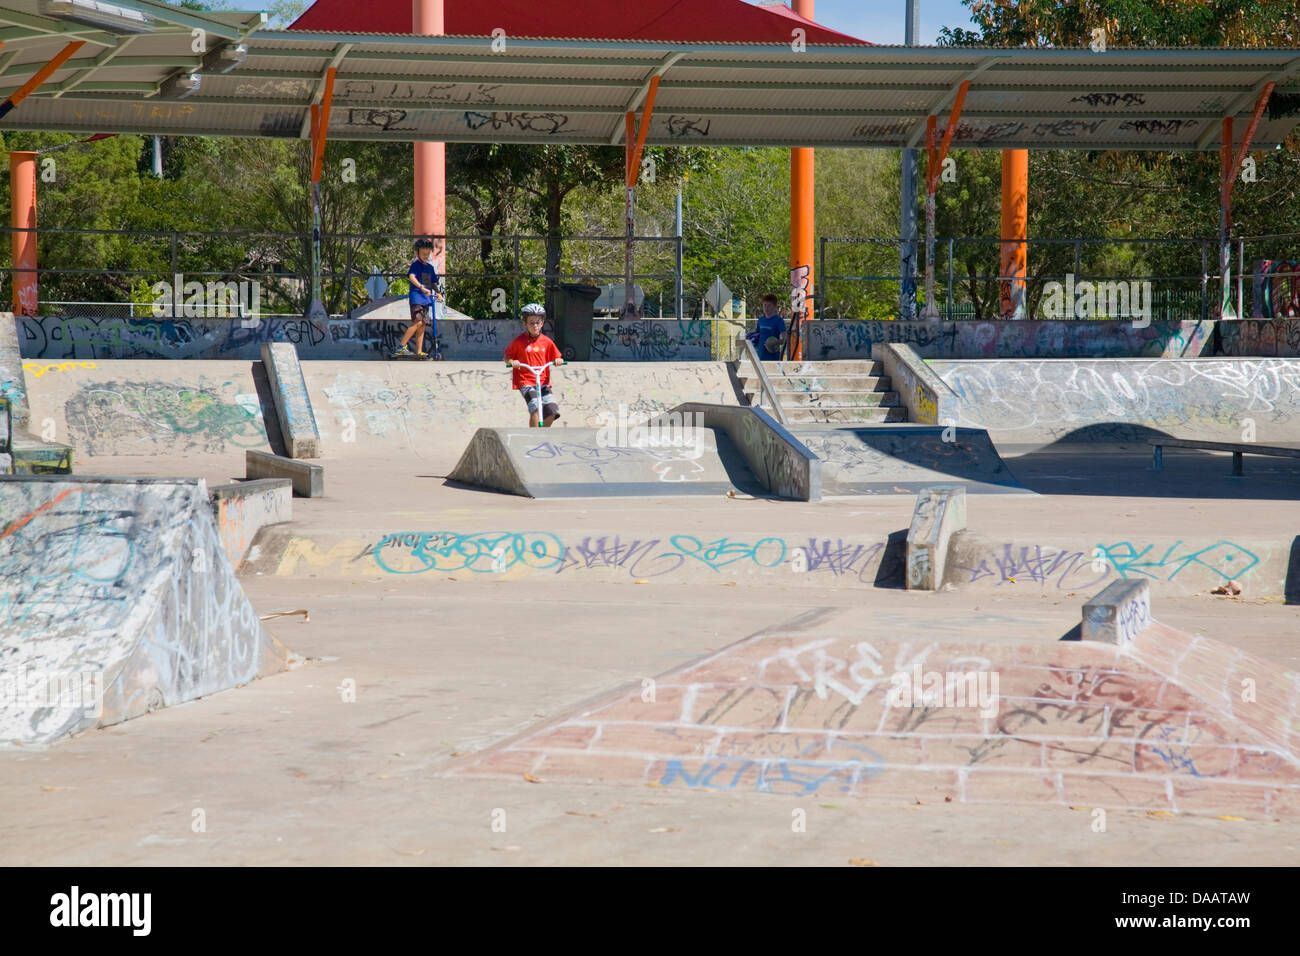 skateboard park at leanyer recreation centre,darwin,northern territory,australia Stock Photo